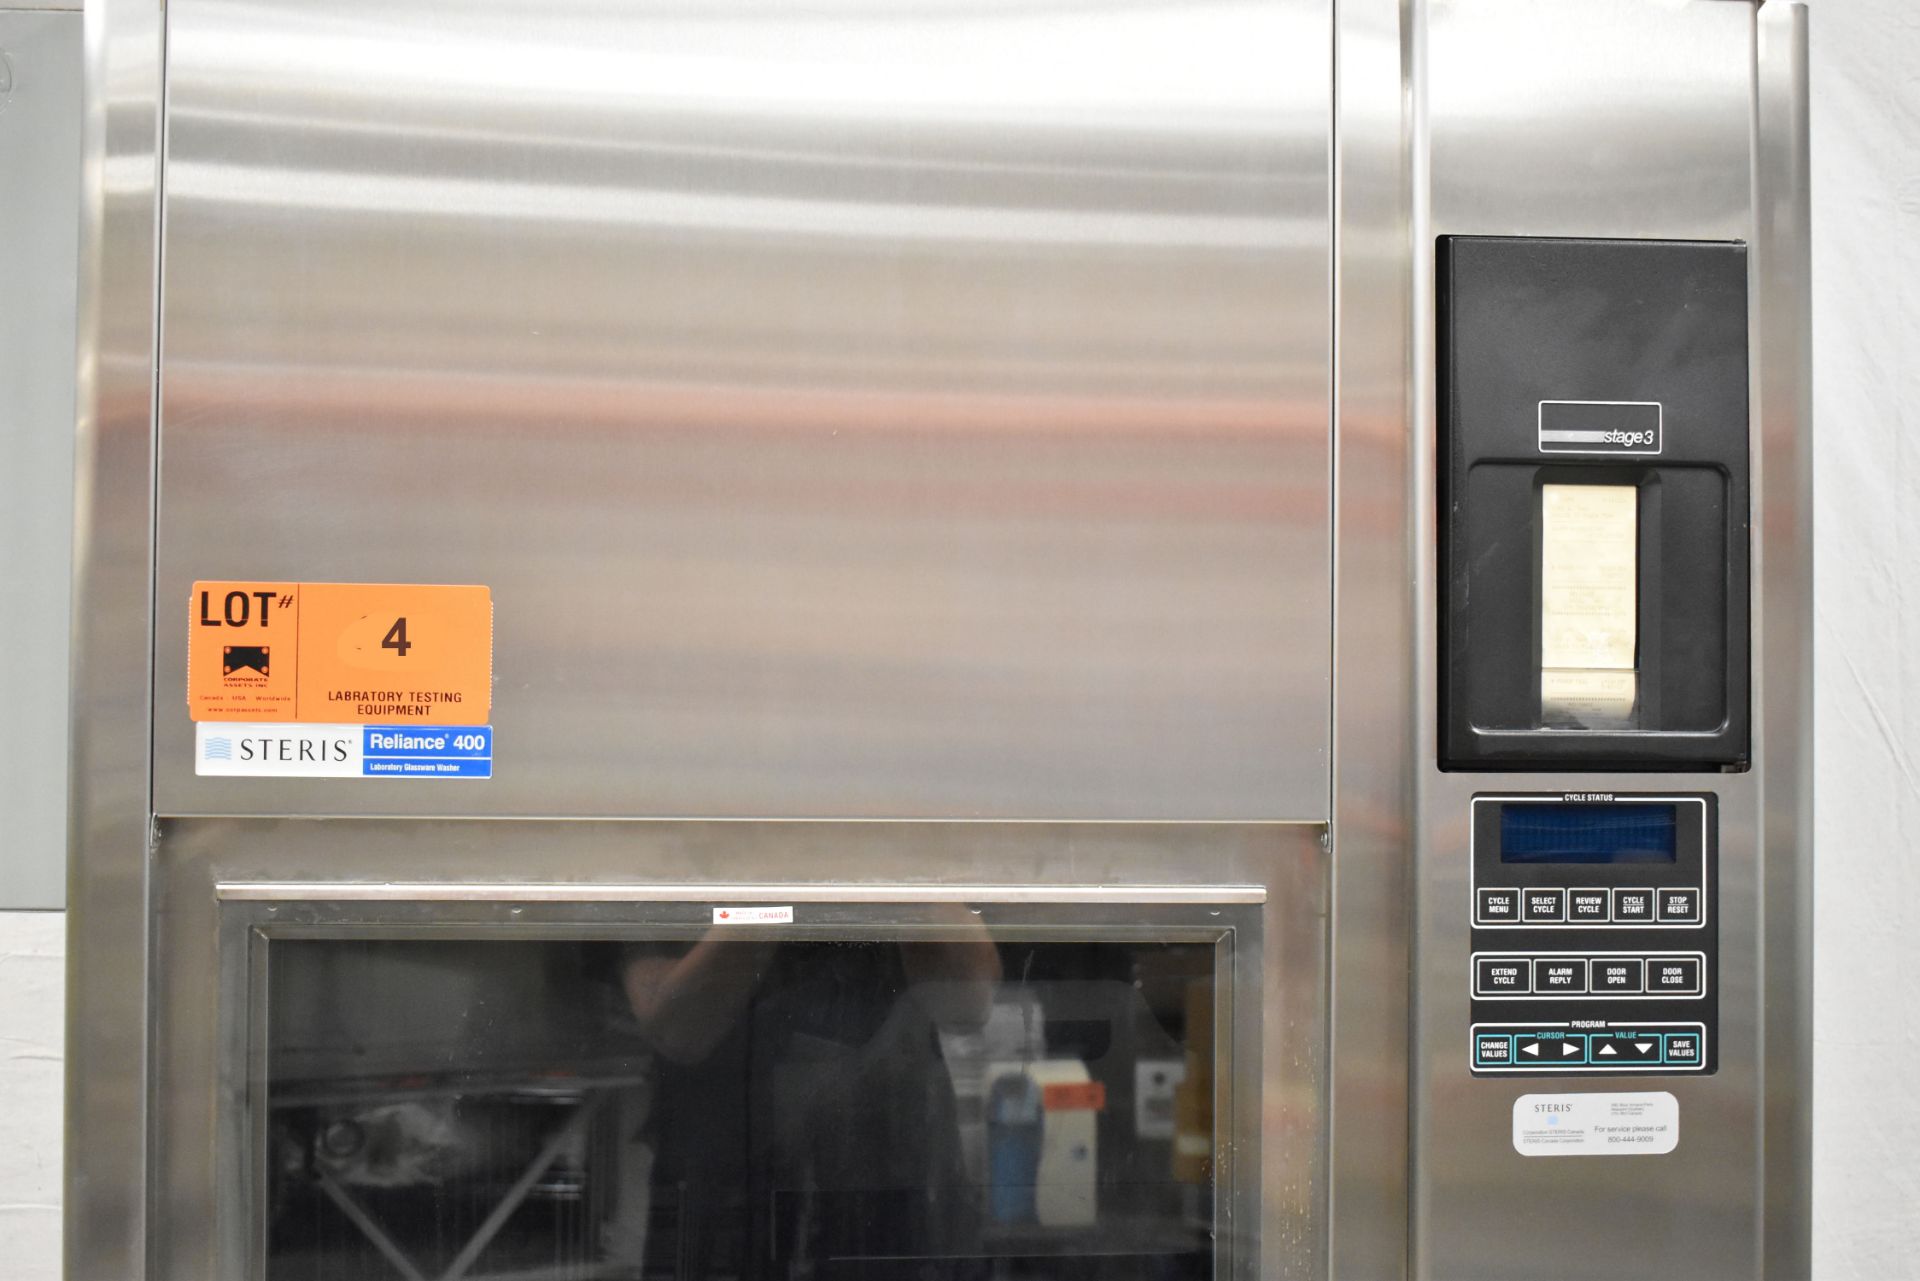 STERIS (2007) RELIANCE 400 LABORATORY GLASSWARE WASHER WITH DIGITAL TOUCH SCREEN CONTROL, THERMAL - Image 3 of 7